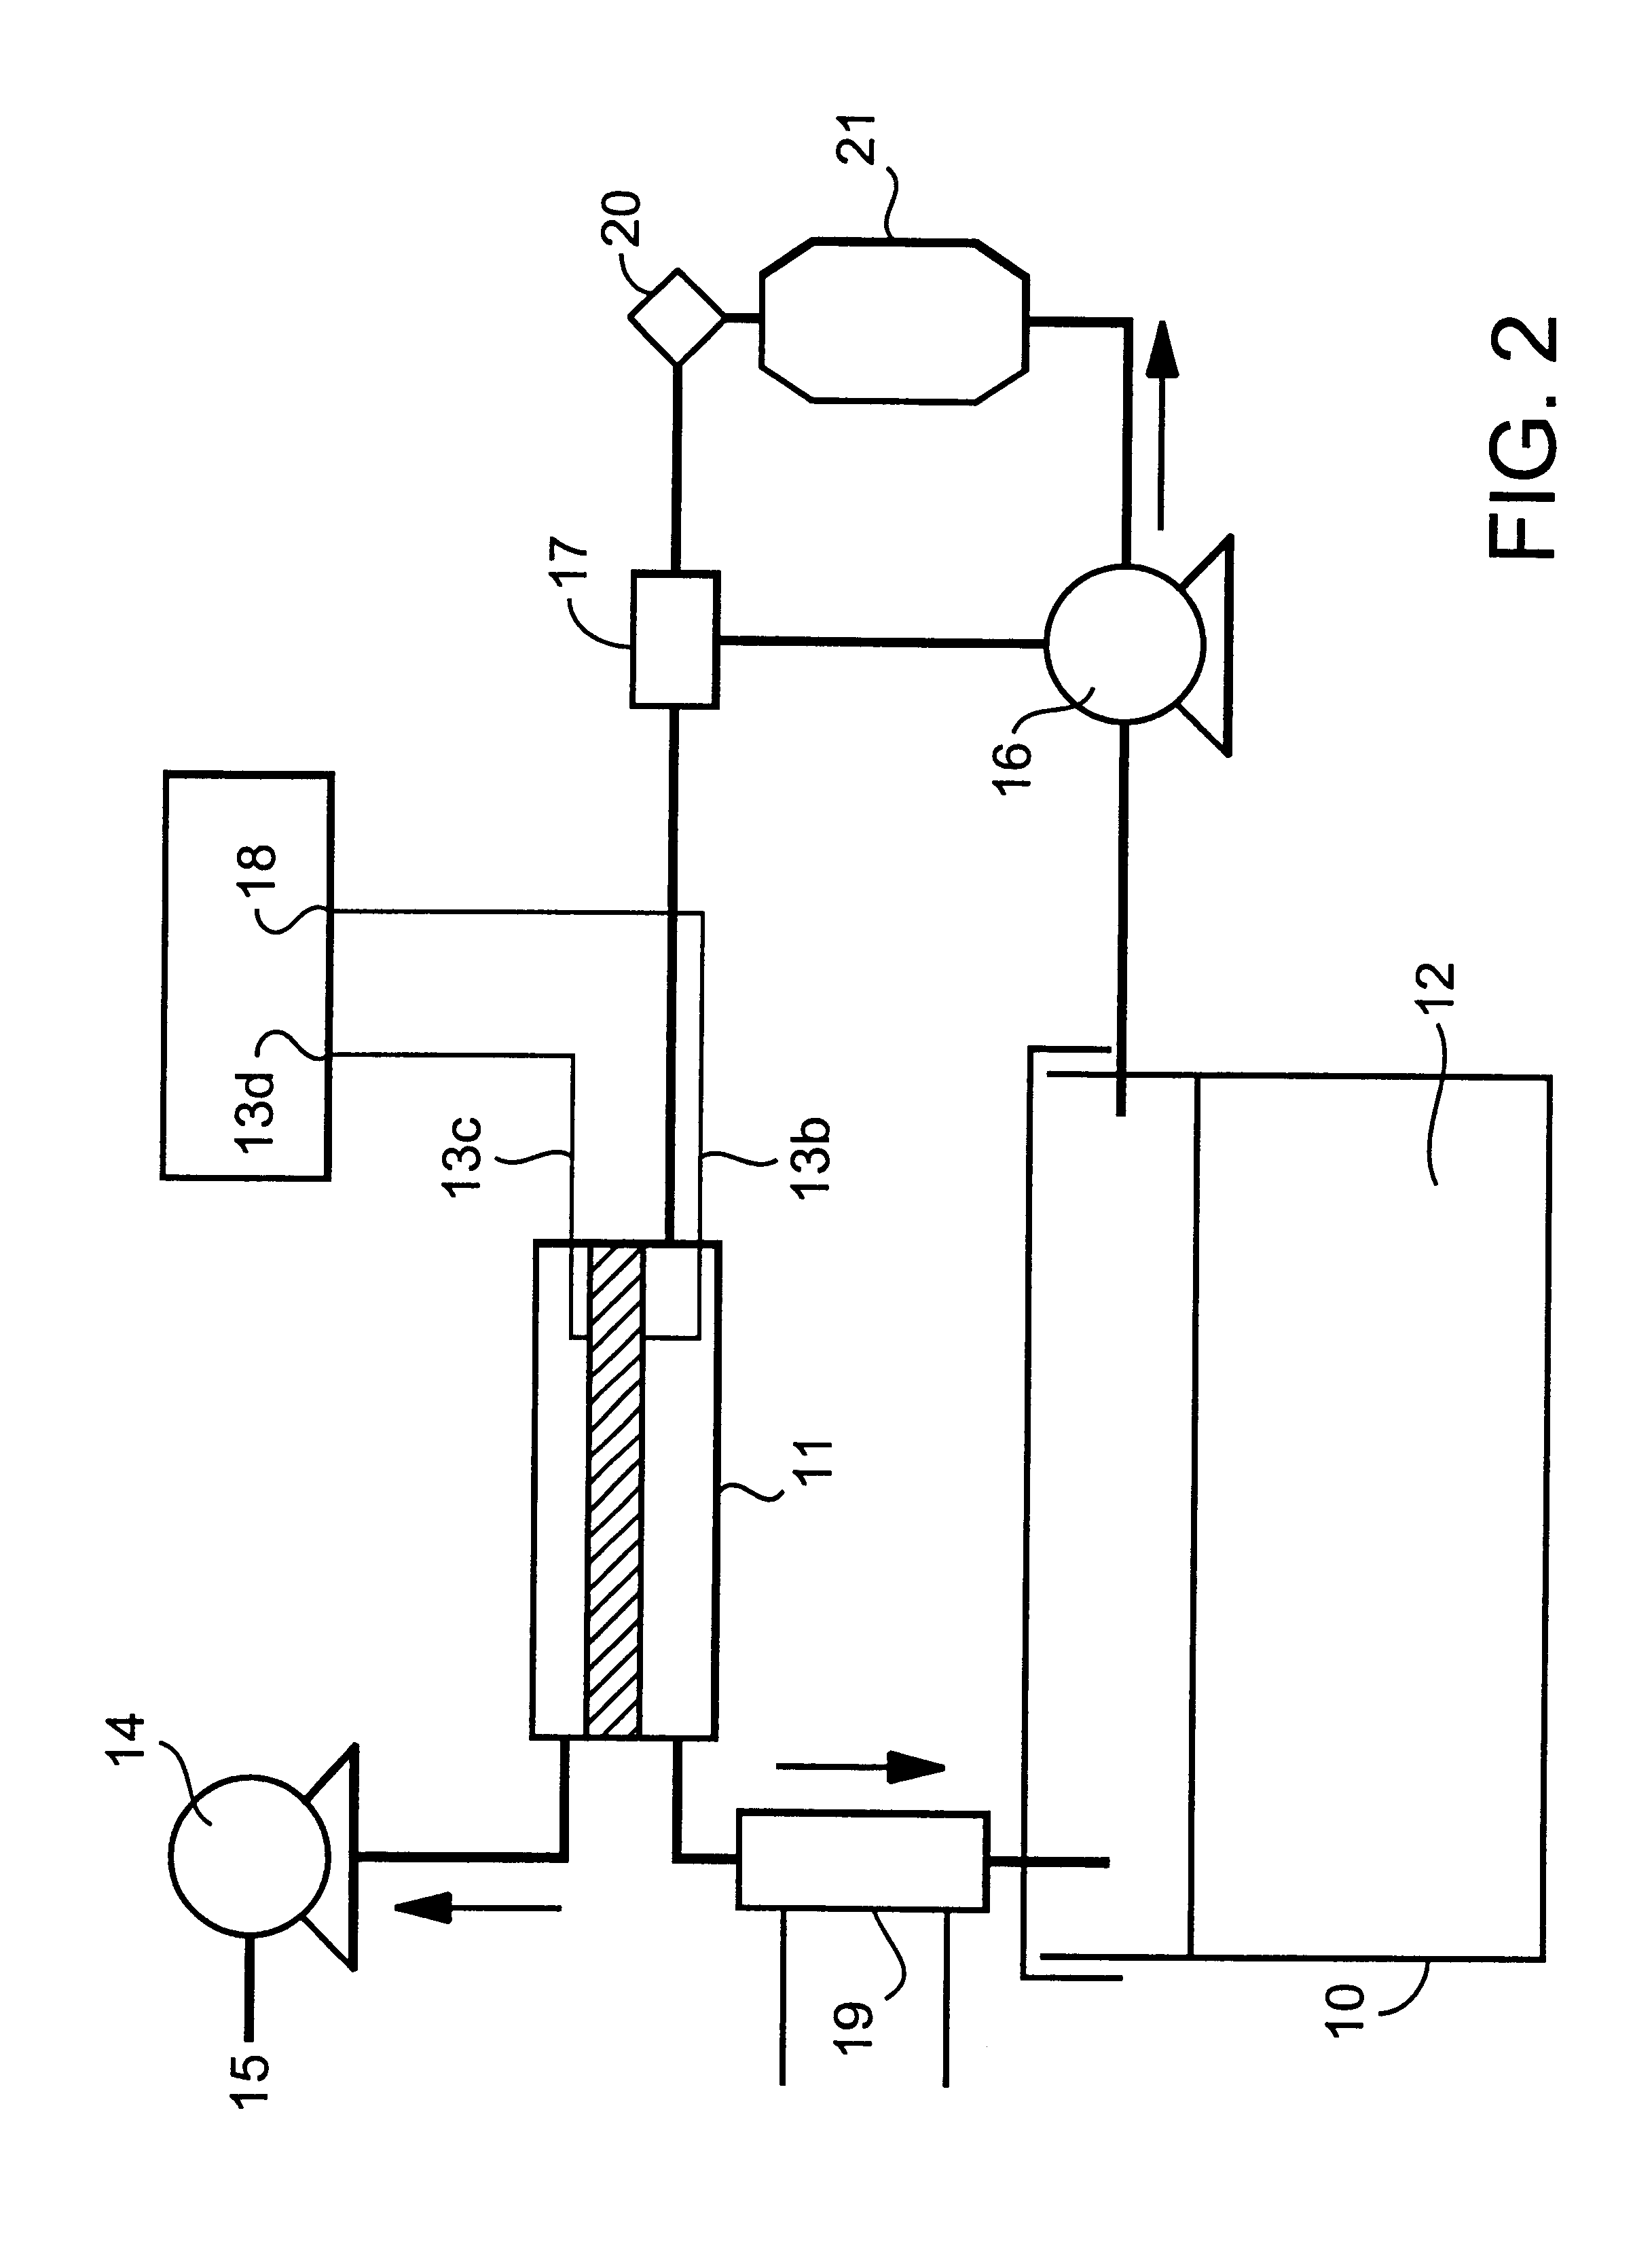 Device for reducing the oxidation of food products